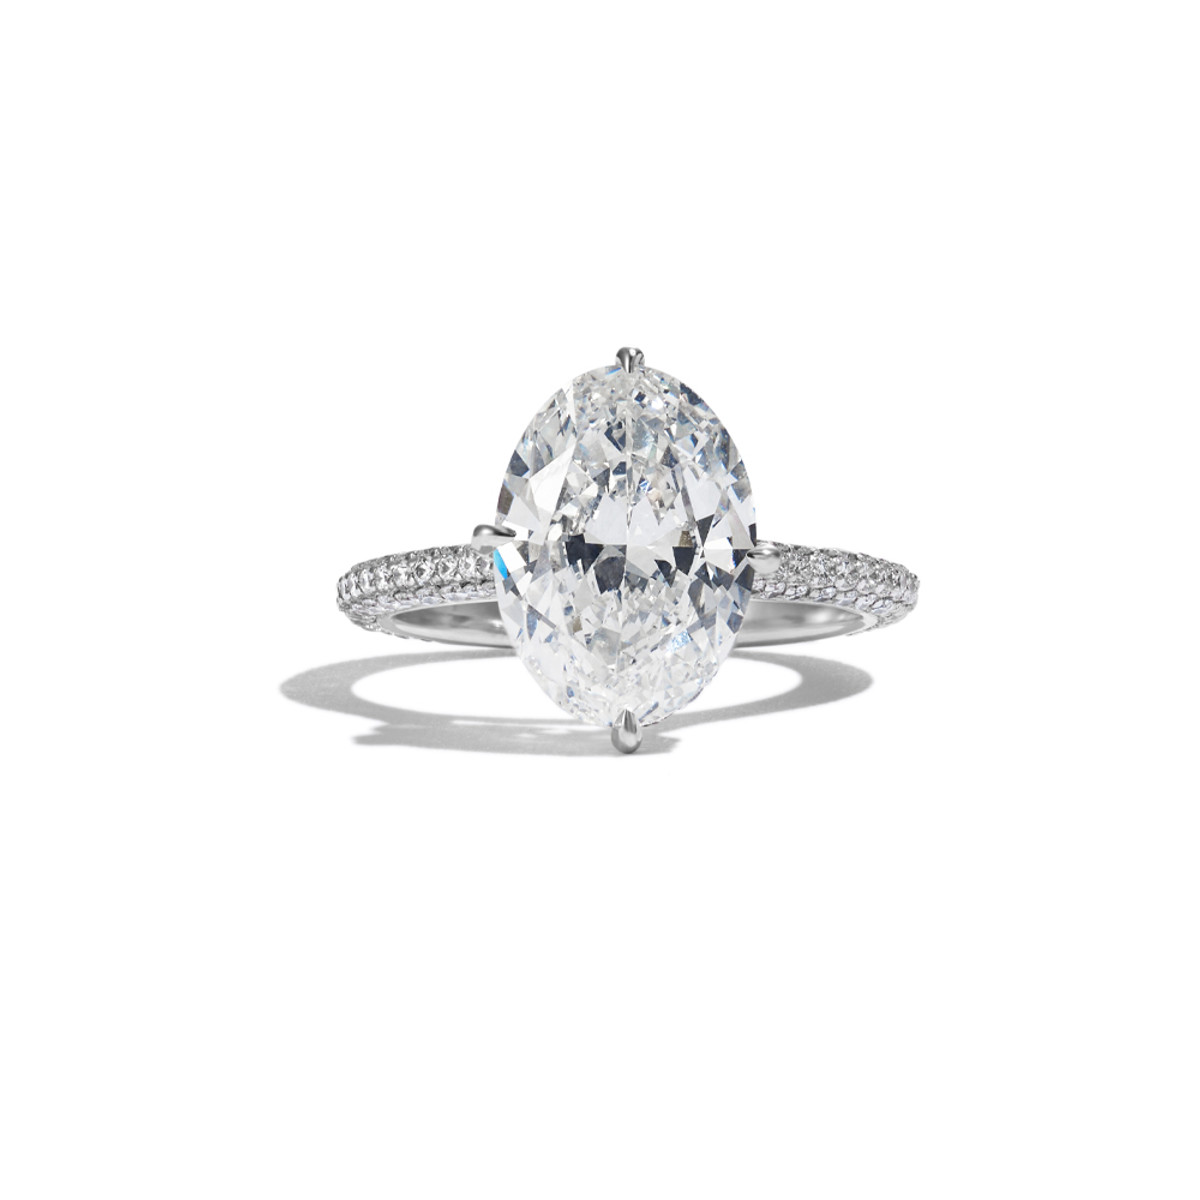 Hyde Park Platinum 4.02ct Oval Diamond Solitaire Hidden Halo Engagement Ring-22995 Product Image